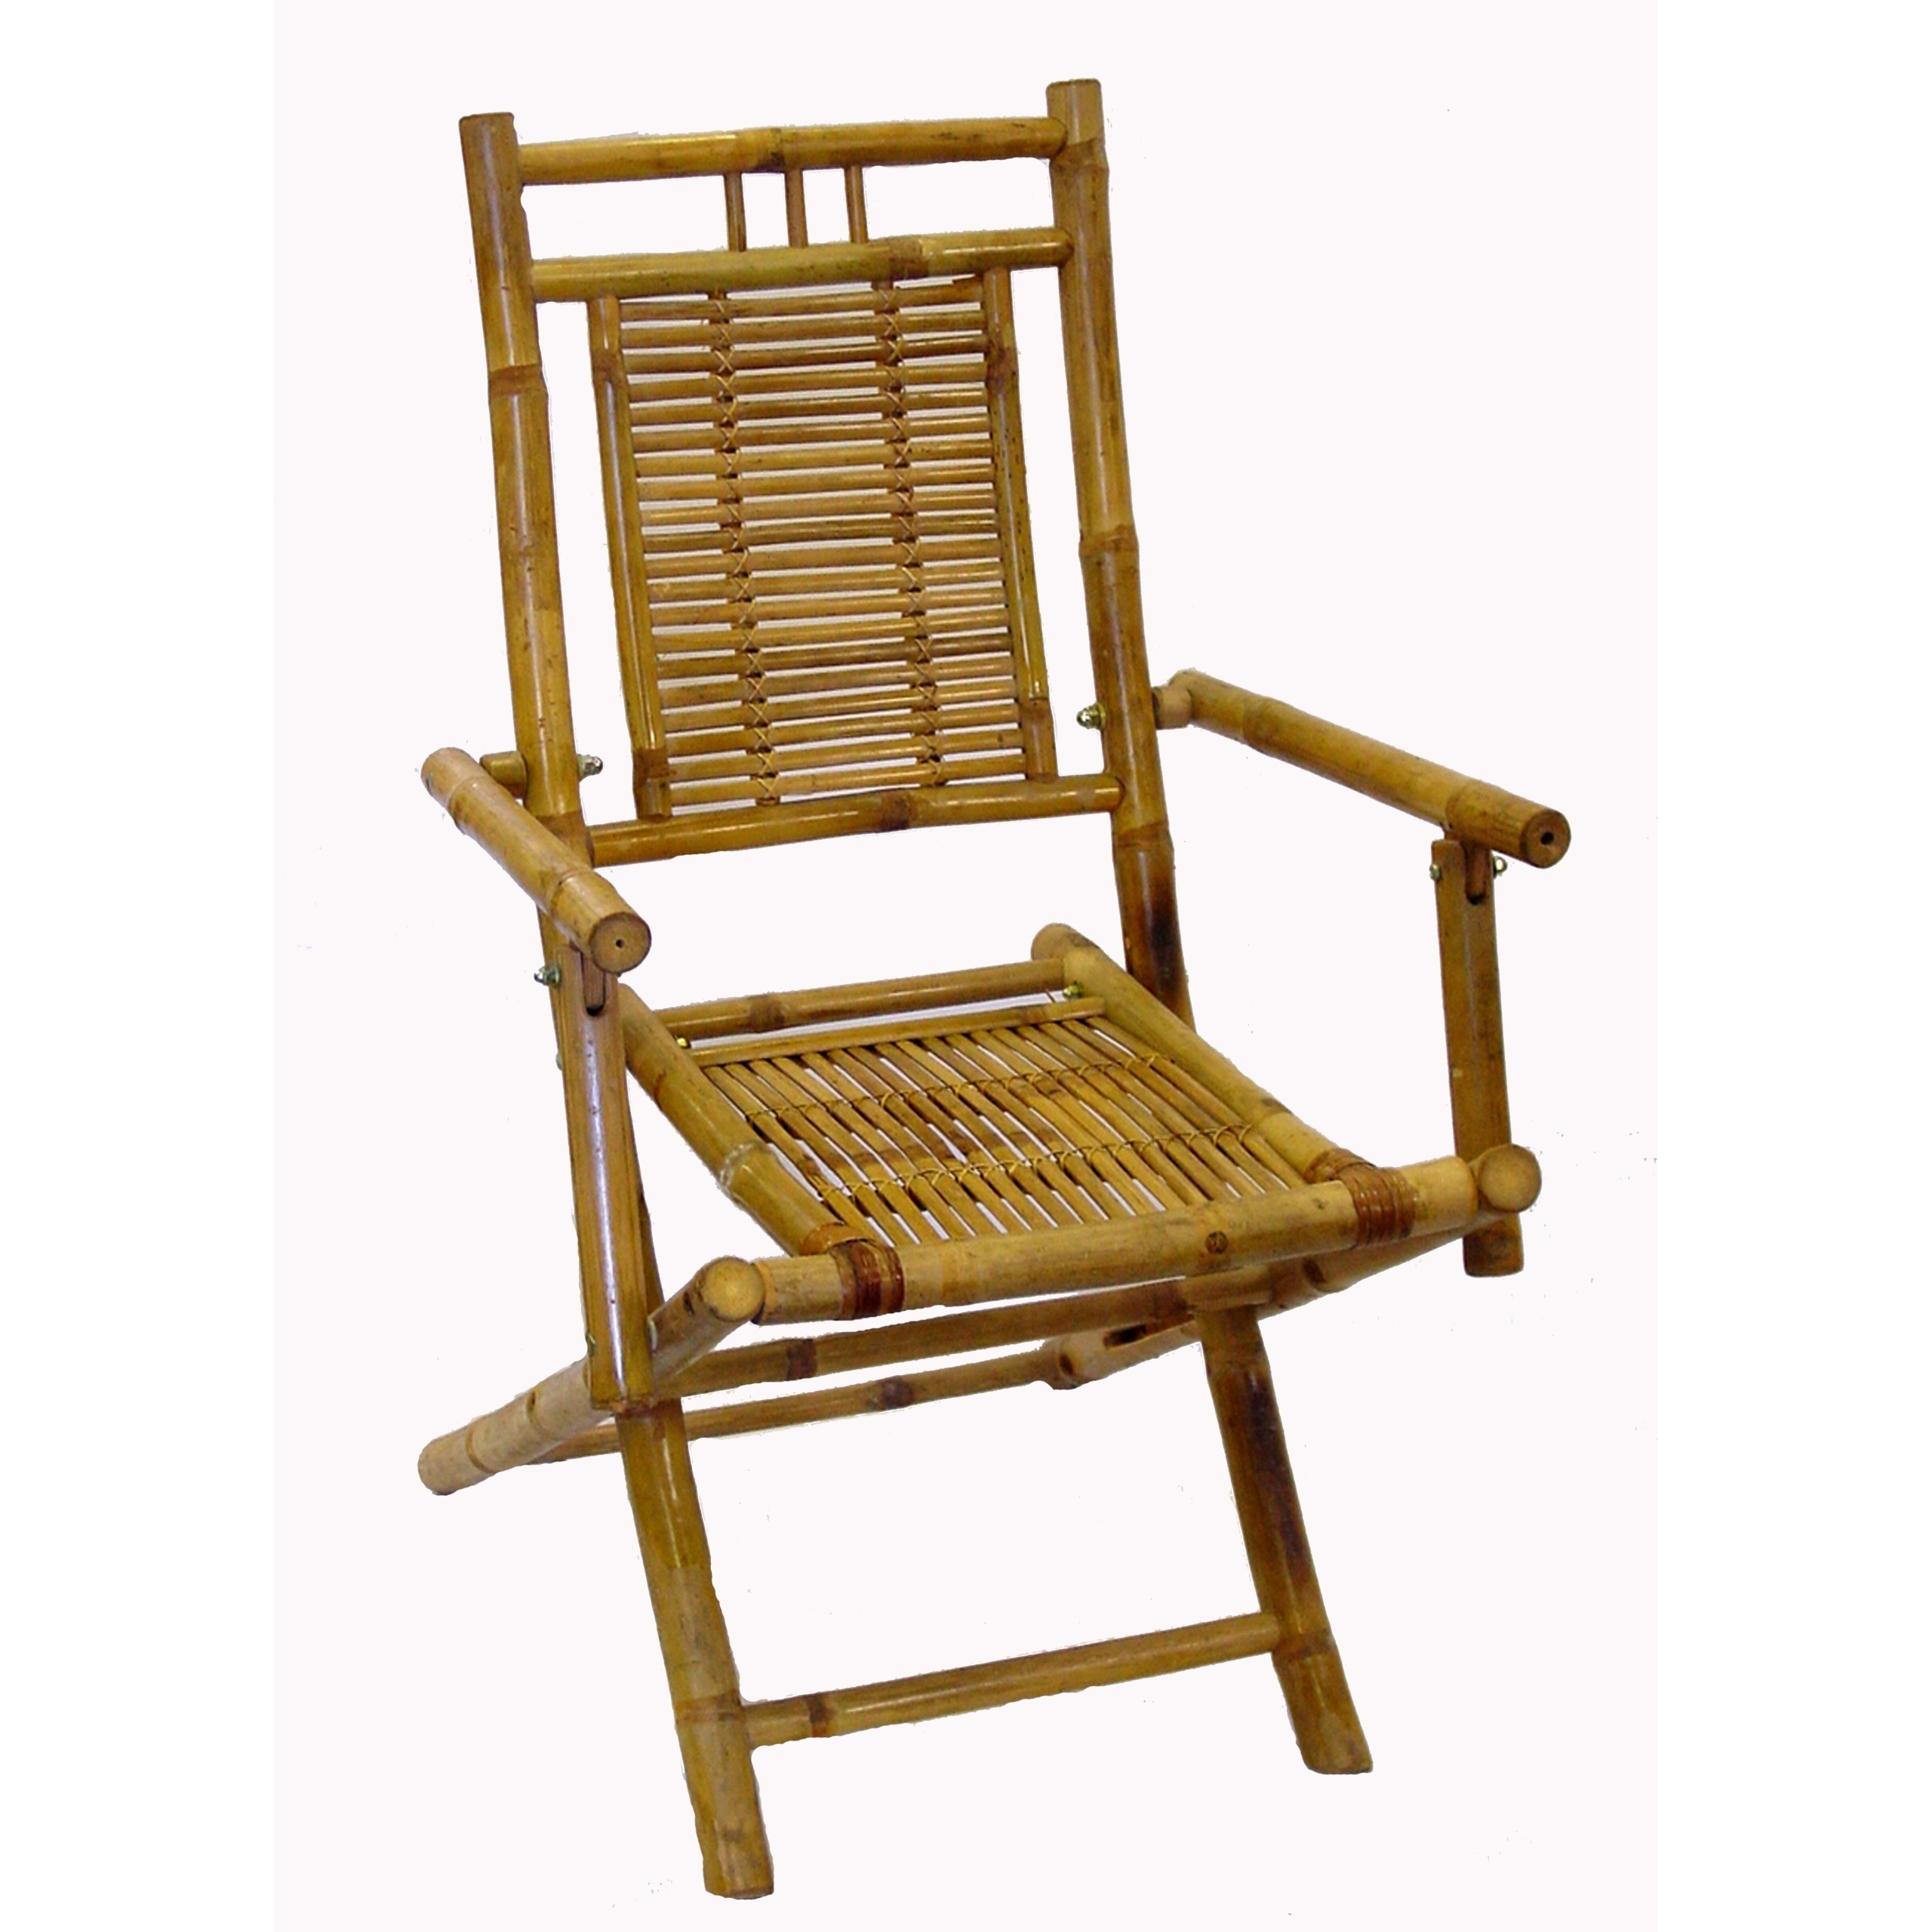 Iuhan 2Pcs Bamboo Chairs Folding Bamboo Patio Chairs Armless Outdoor Indoor Chair Furniture 